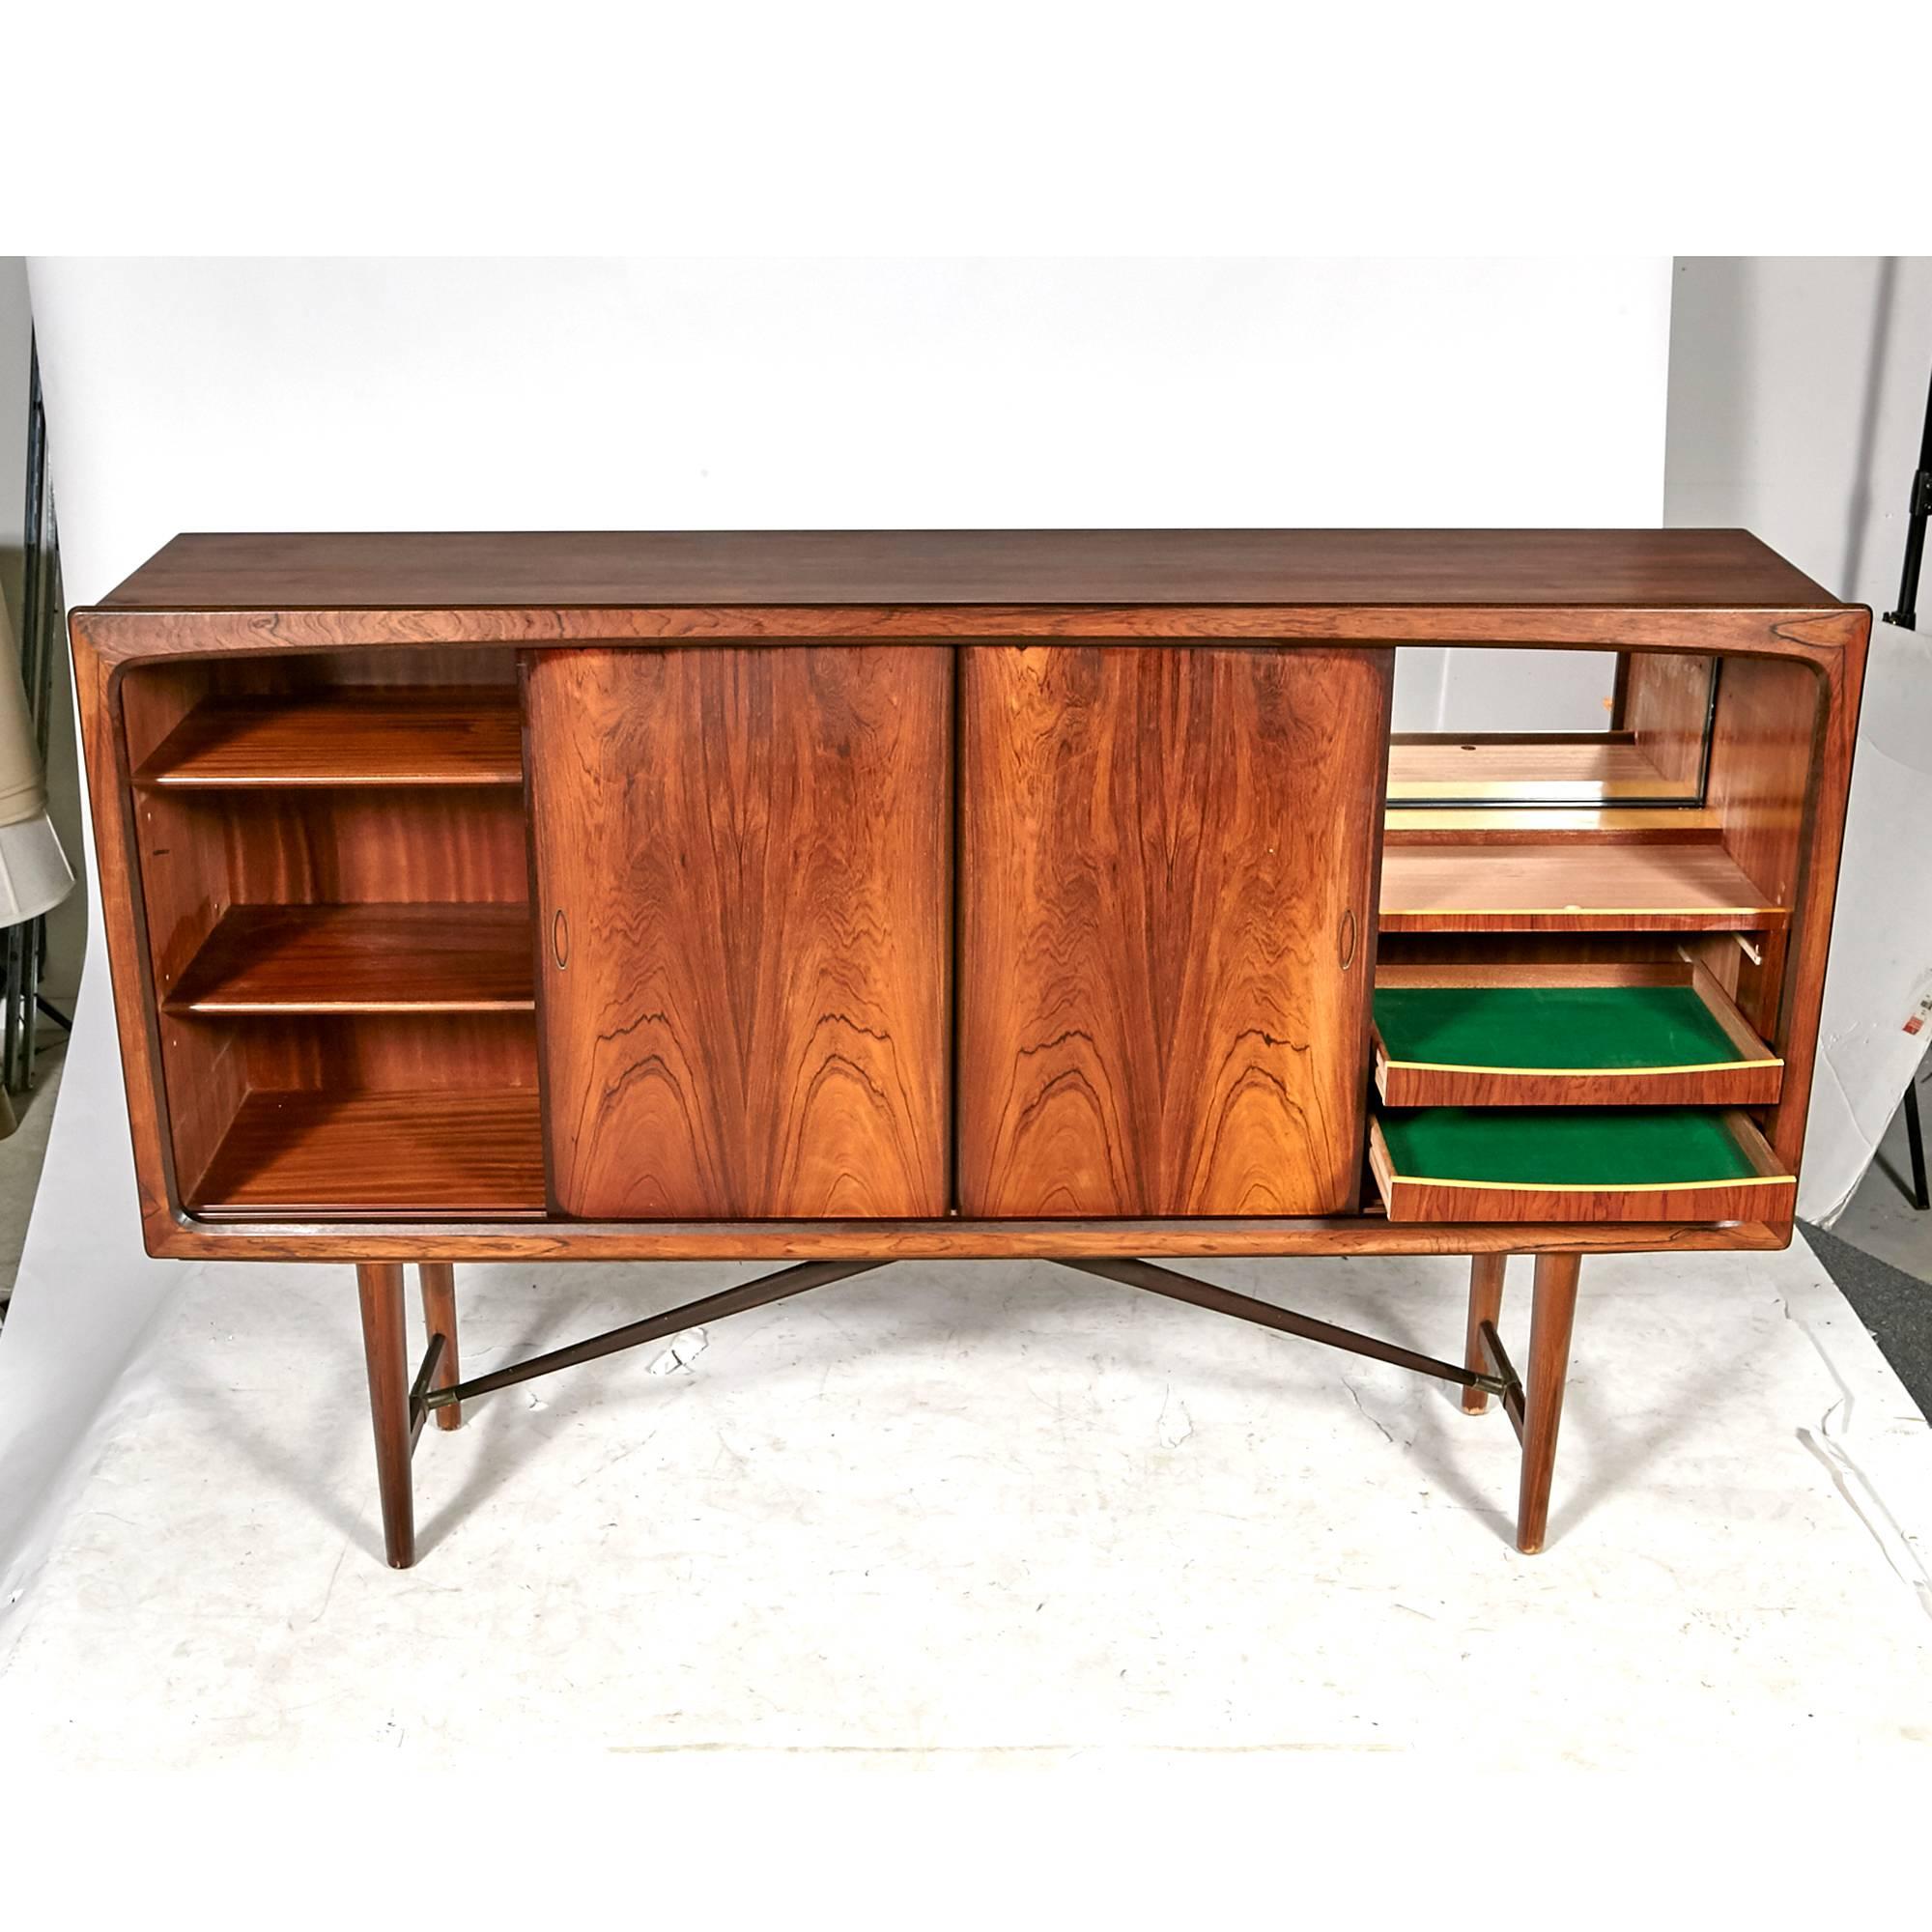 A. L. Johansen & Søn Danish Rosewood Sideboard, 1960s In Excellent Condition For Sale In Amherst, NH